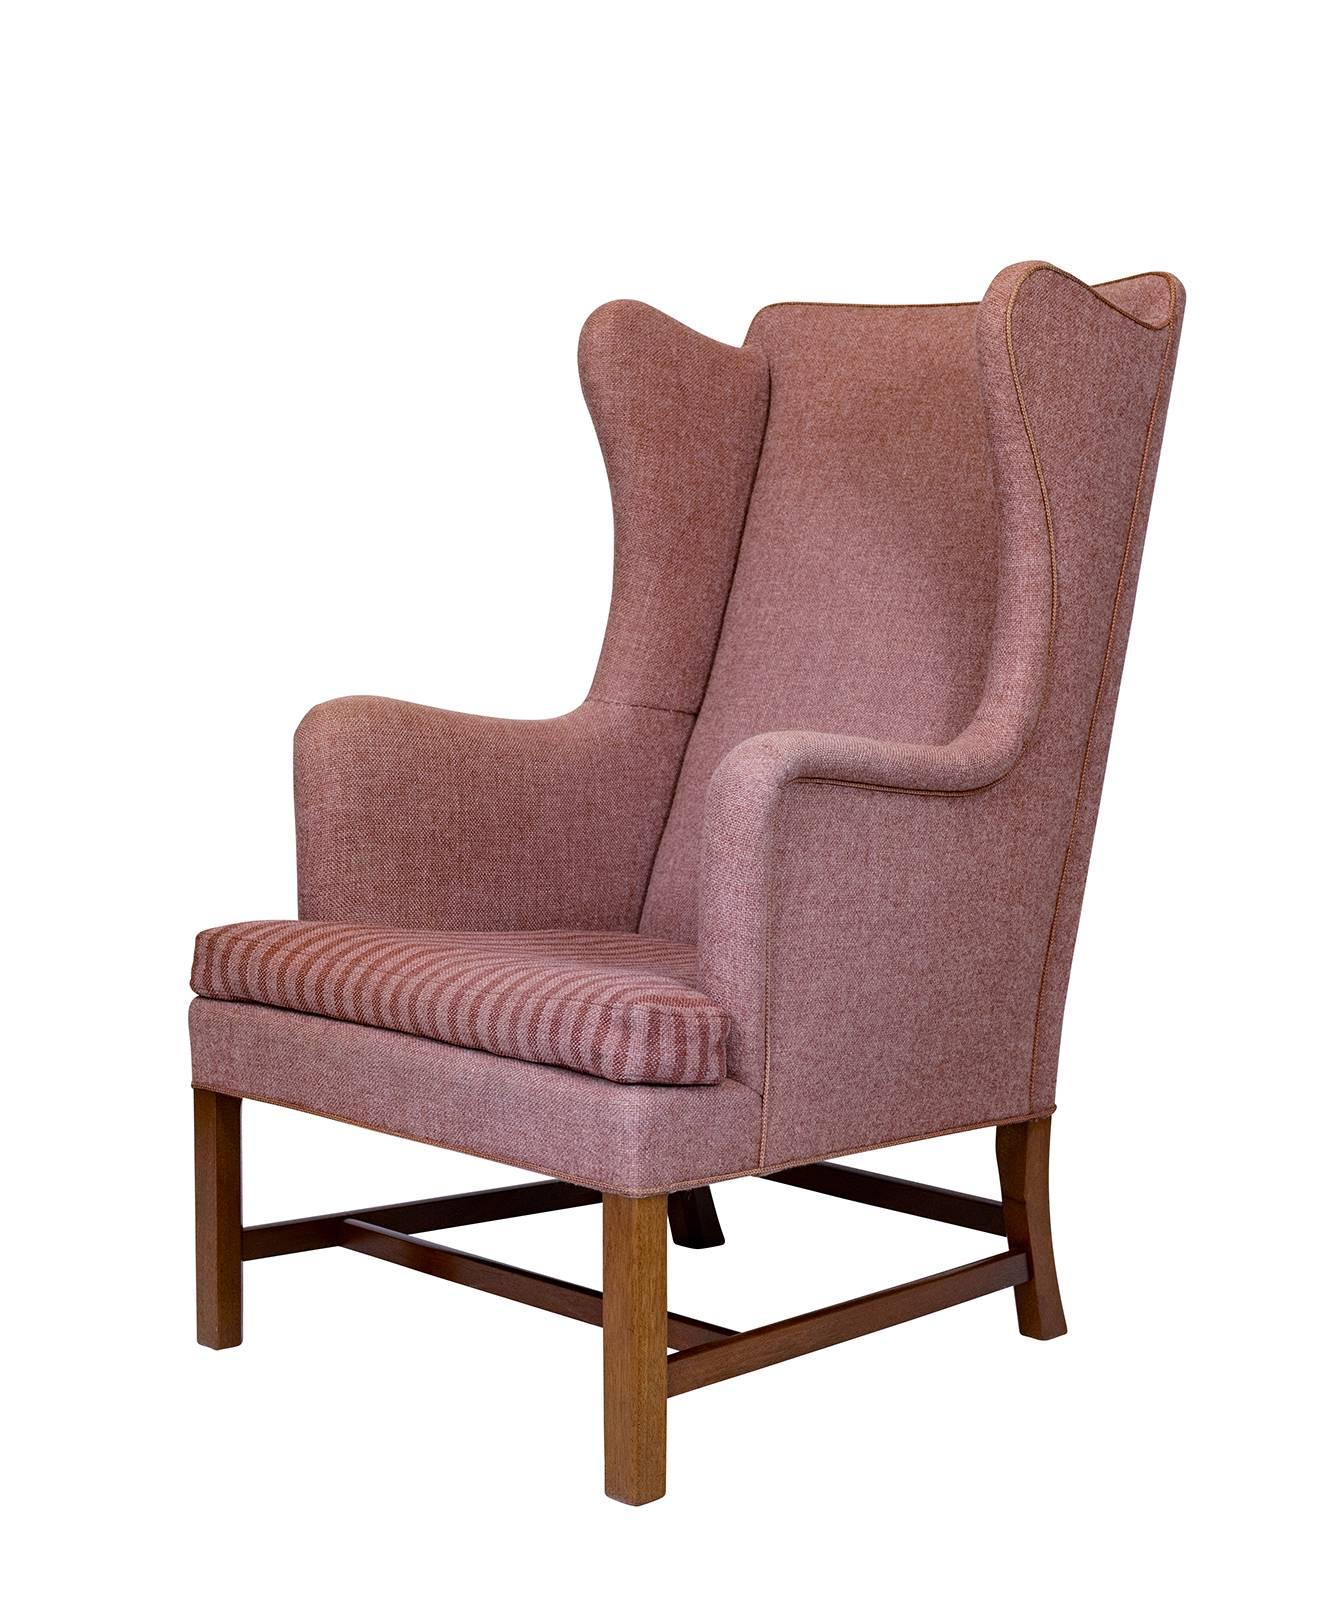 Kaare Klint wingback chair Designed in 1941 and Produced by Rud Rasmussen.    Store formerly known as ARTFUL DODGER INC